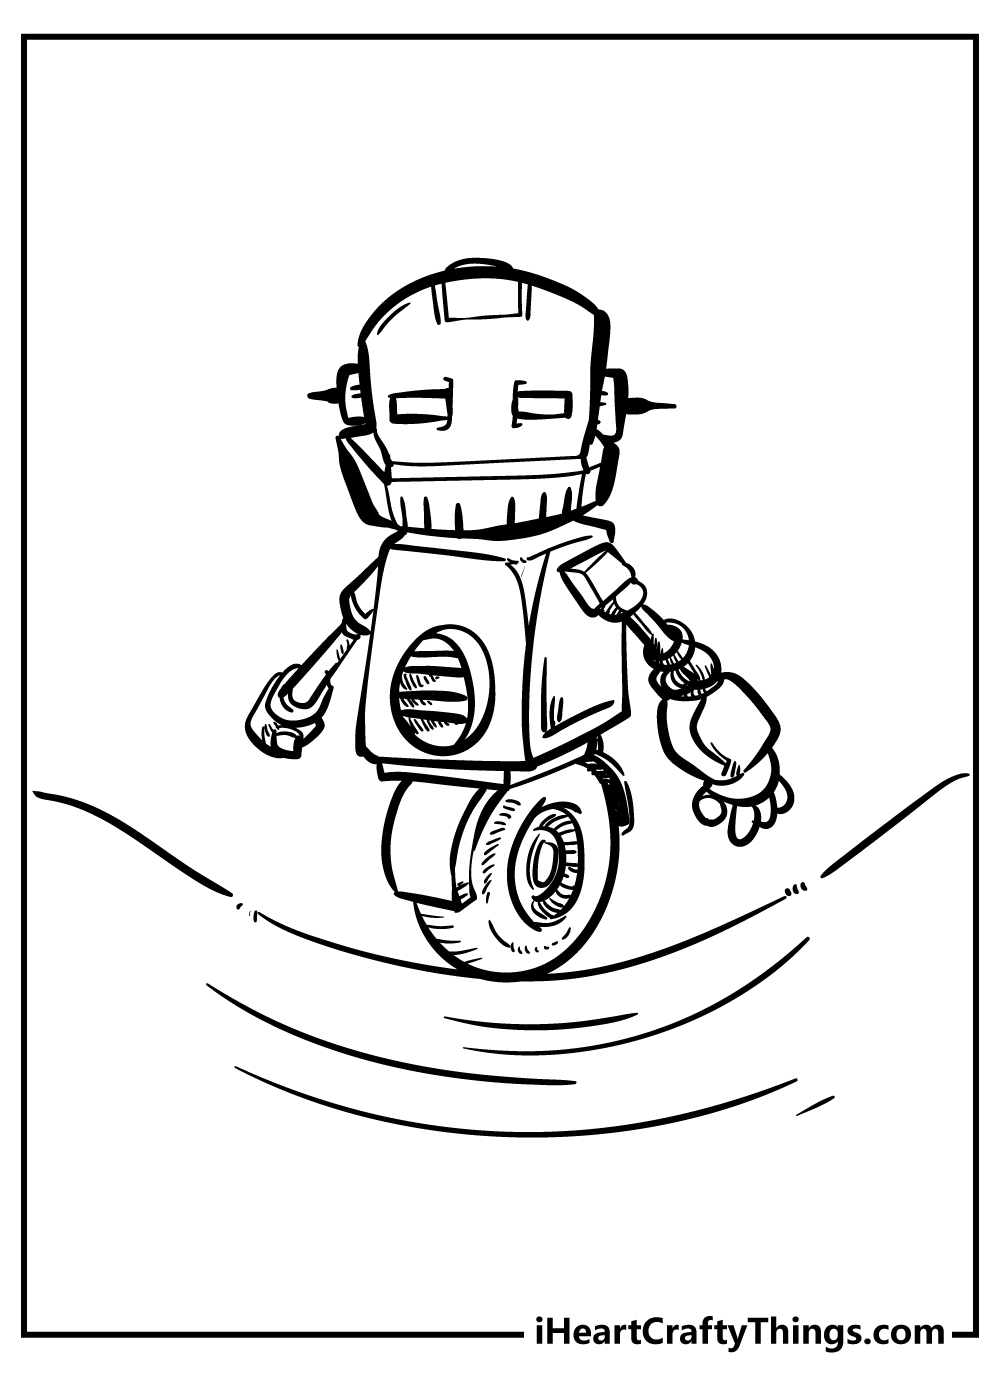 Robot coloring pages free printables